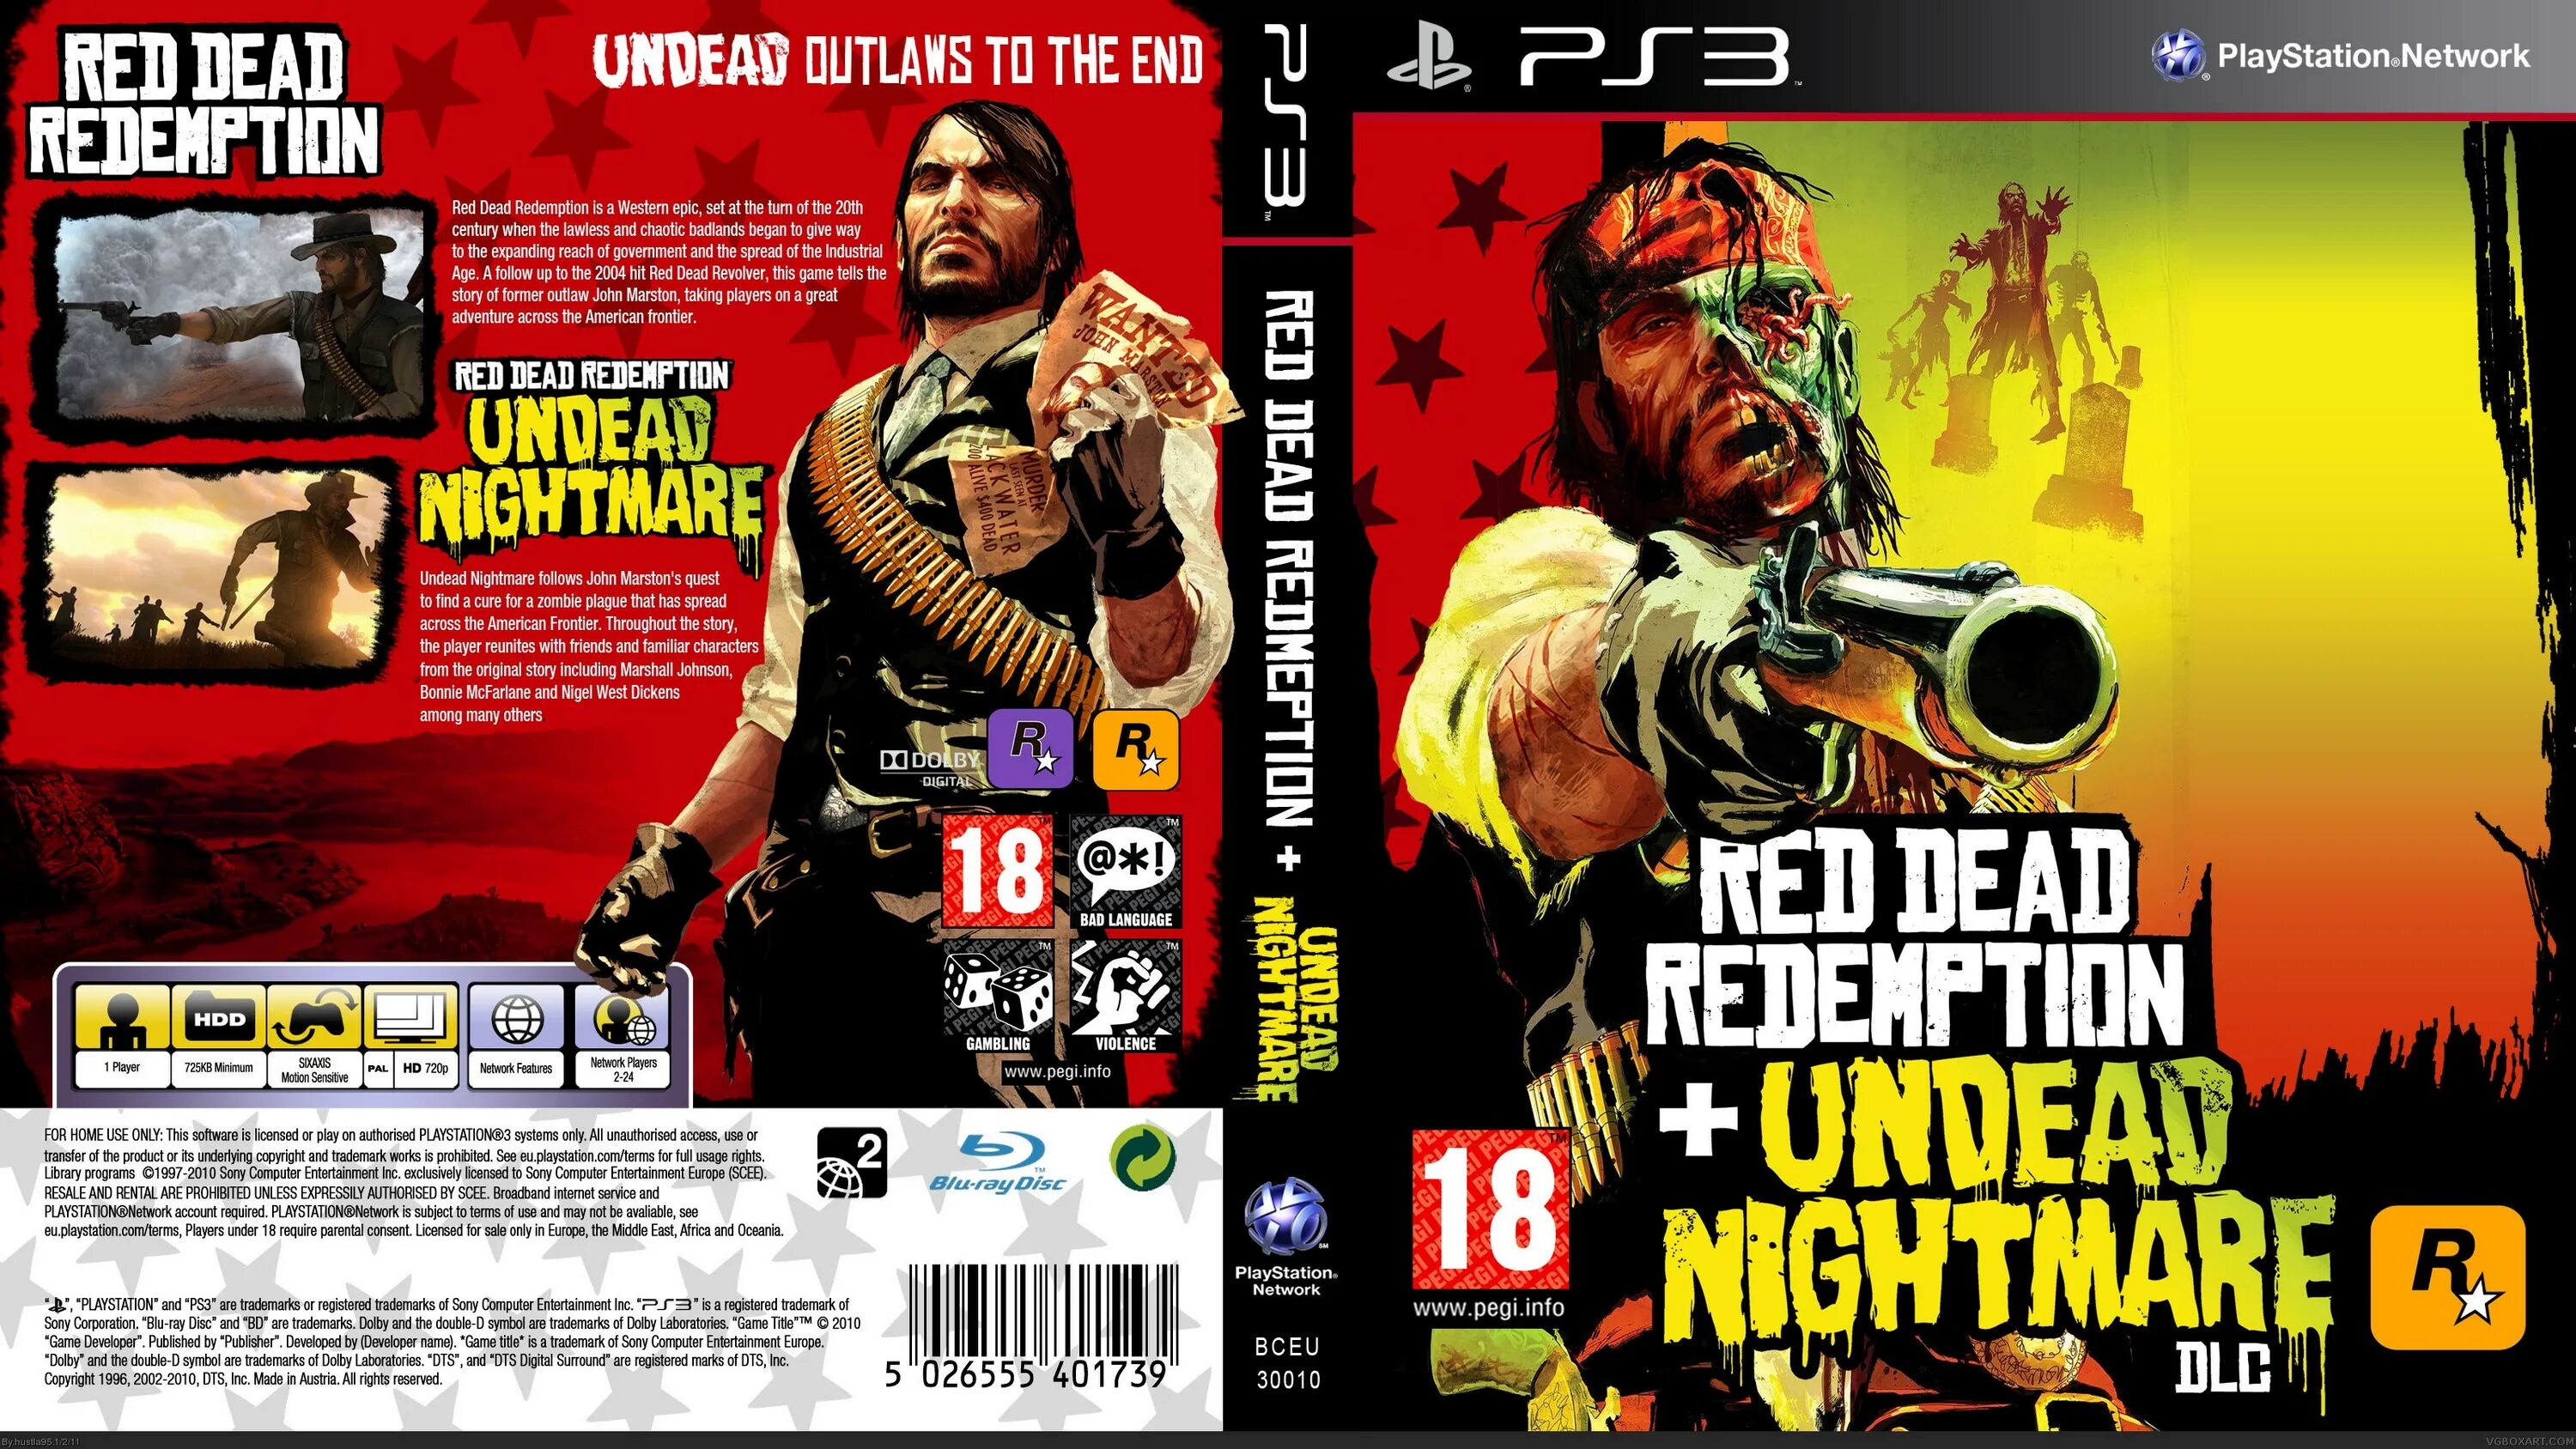 Red Dead Redemption Xbox 360 Cover. Red Dead Redemption PLAYSTATION 3. Red Dead Redemption Undead Nightmare Xbox 360. Red Dead Redemption Undead Nightmare Xbox 360 обложка. Зомби на пс3